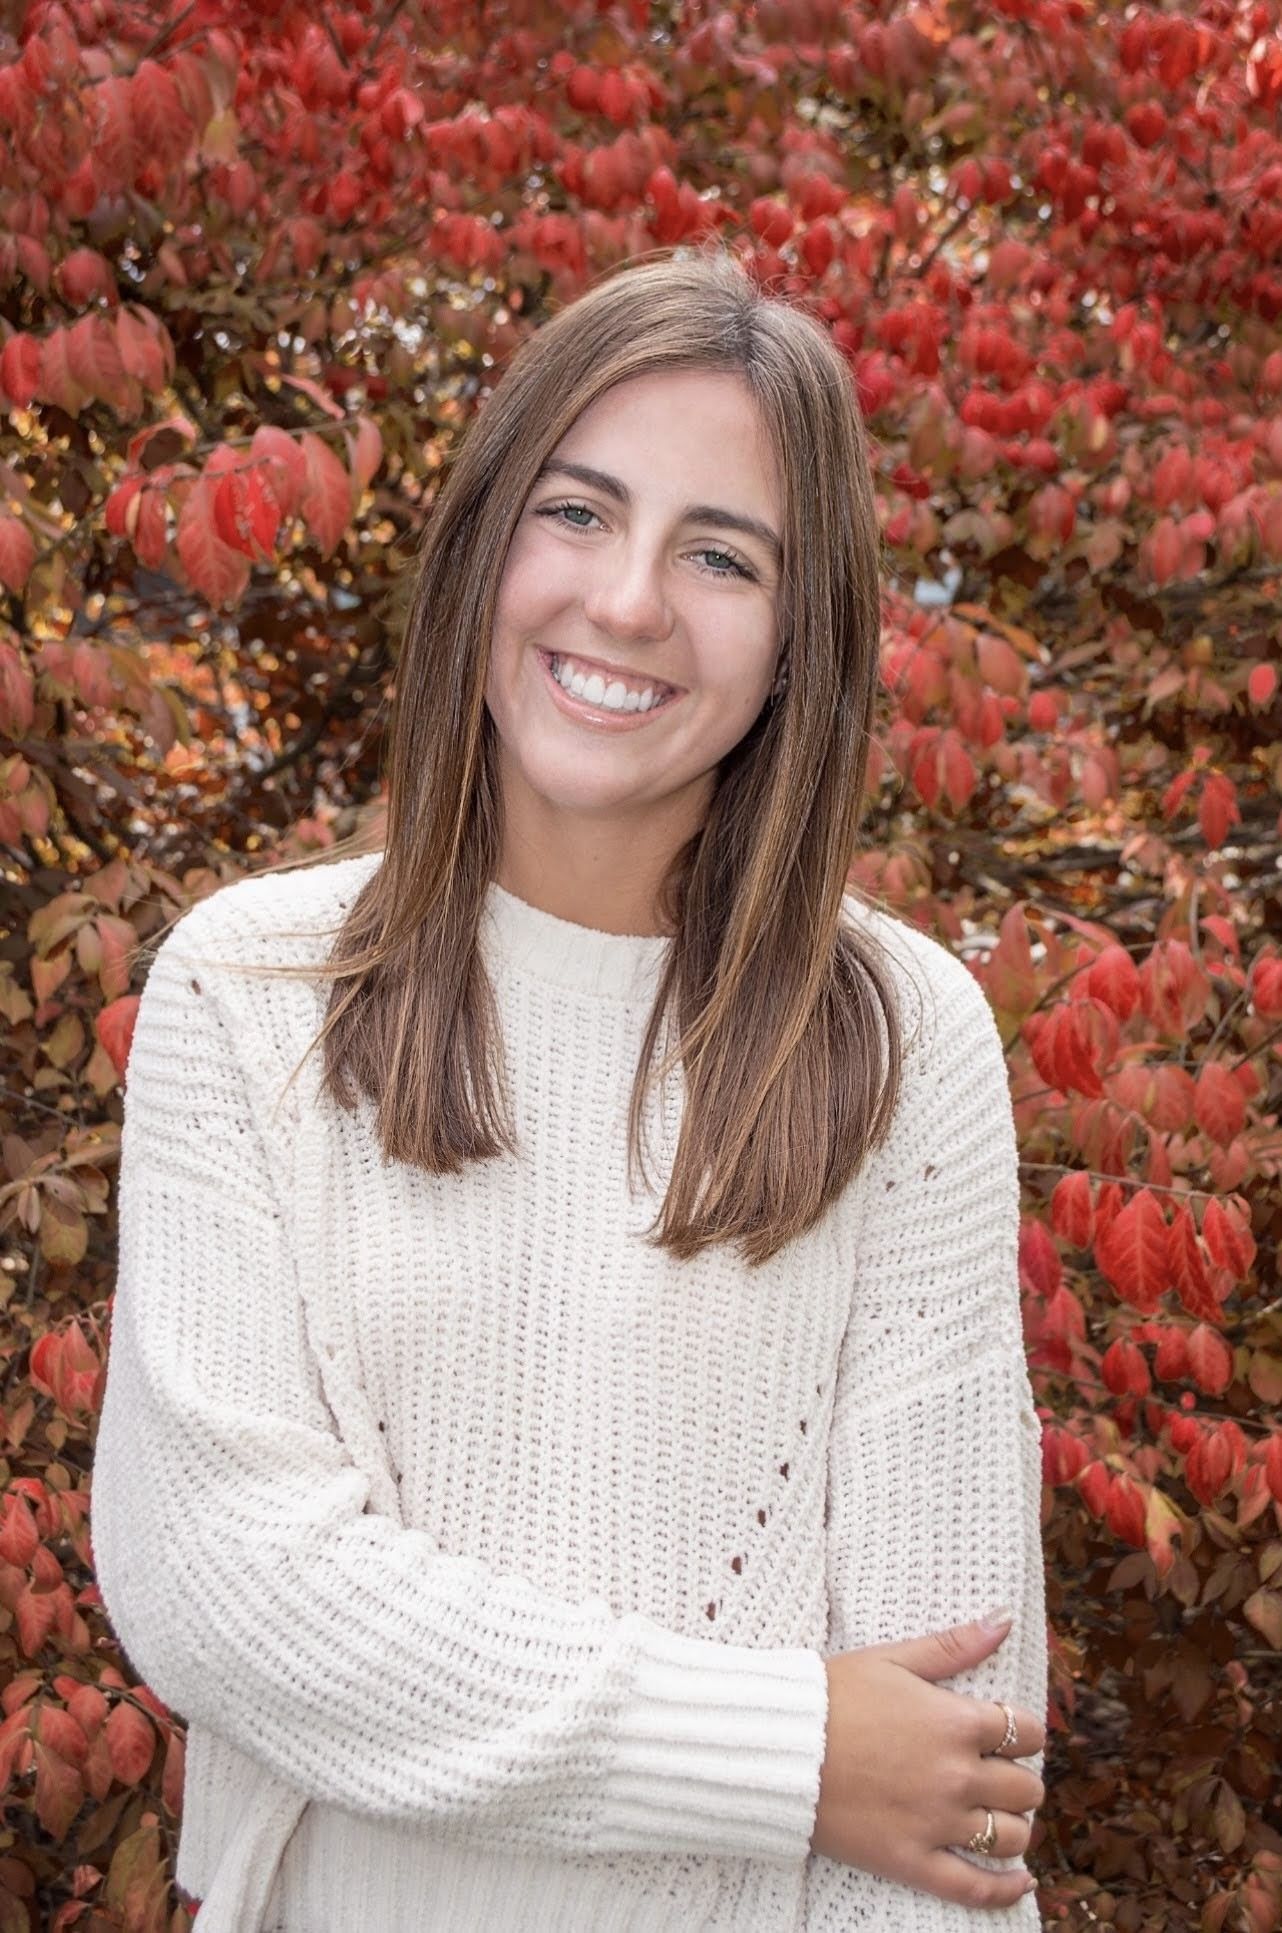 Female student in white sweater smiling in front of fall foliage